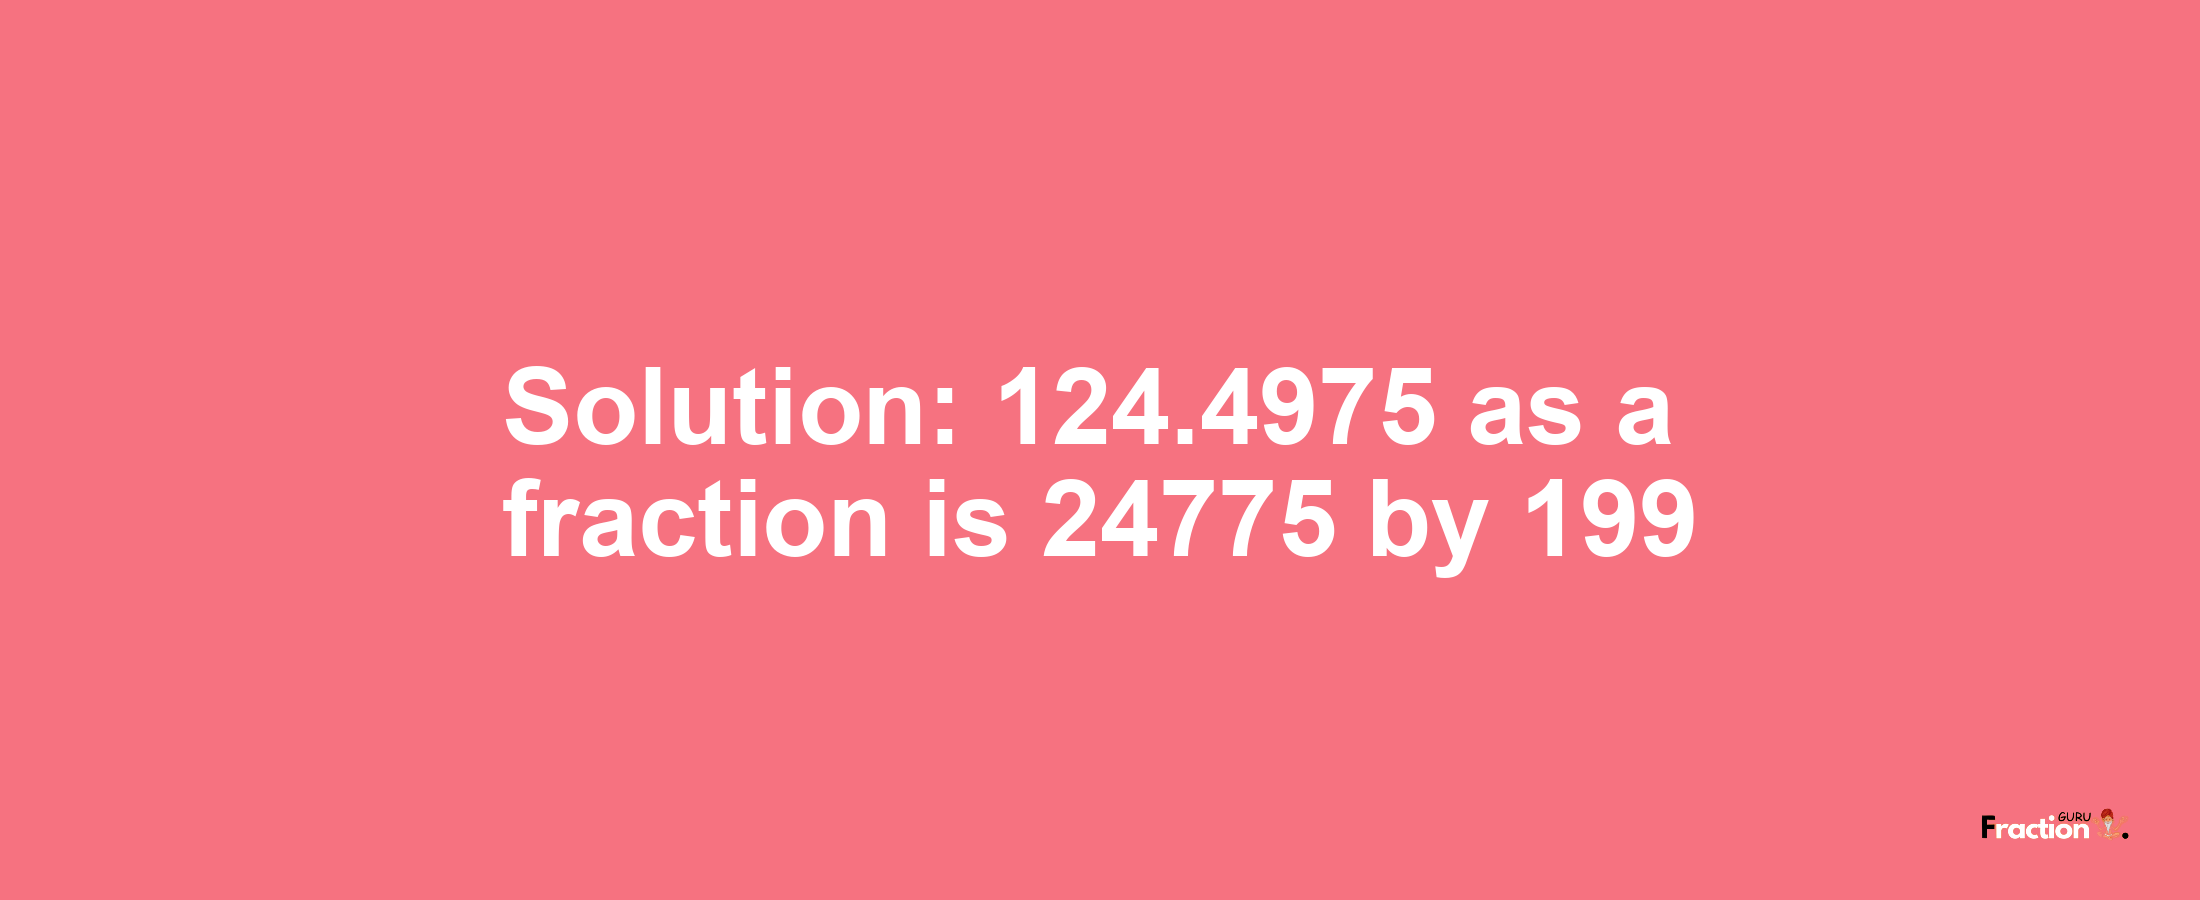 Solution:124.4975 as a fraction is 24775/199